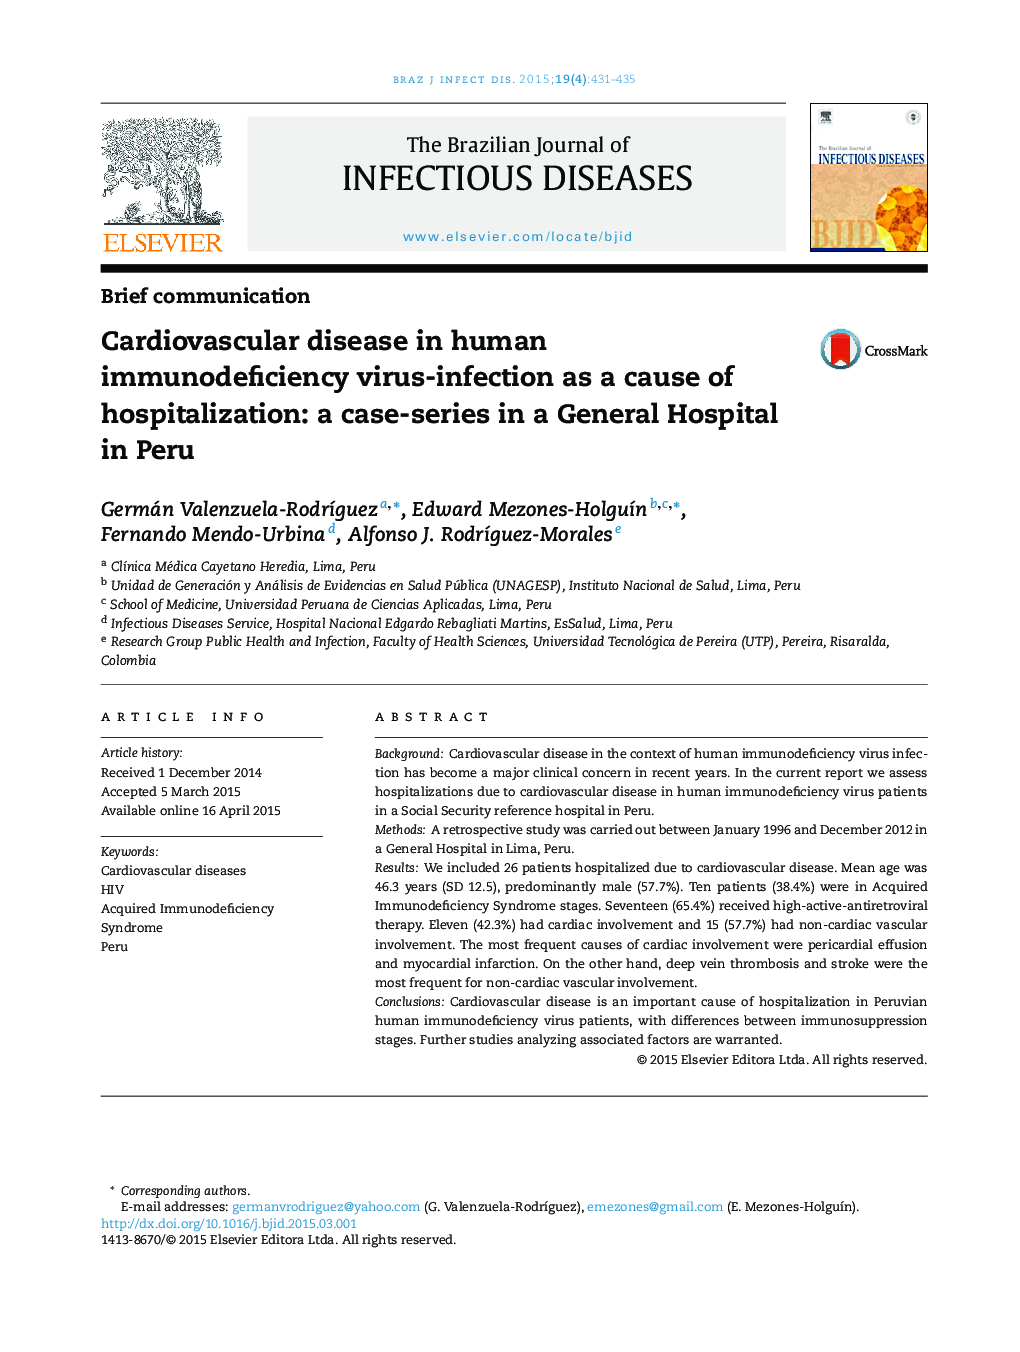 Cardiovascular disease in human immunodeficiency virus-infection as a cause of hospitalization: a case-series in a General Hospital in Peru